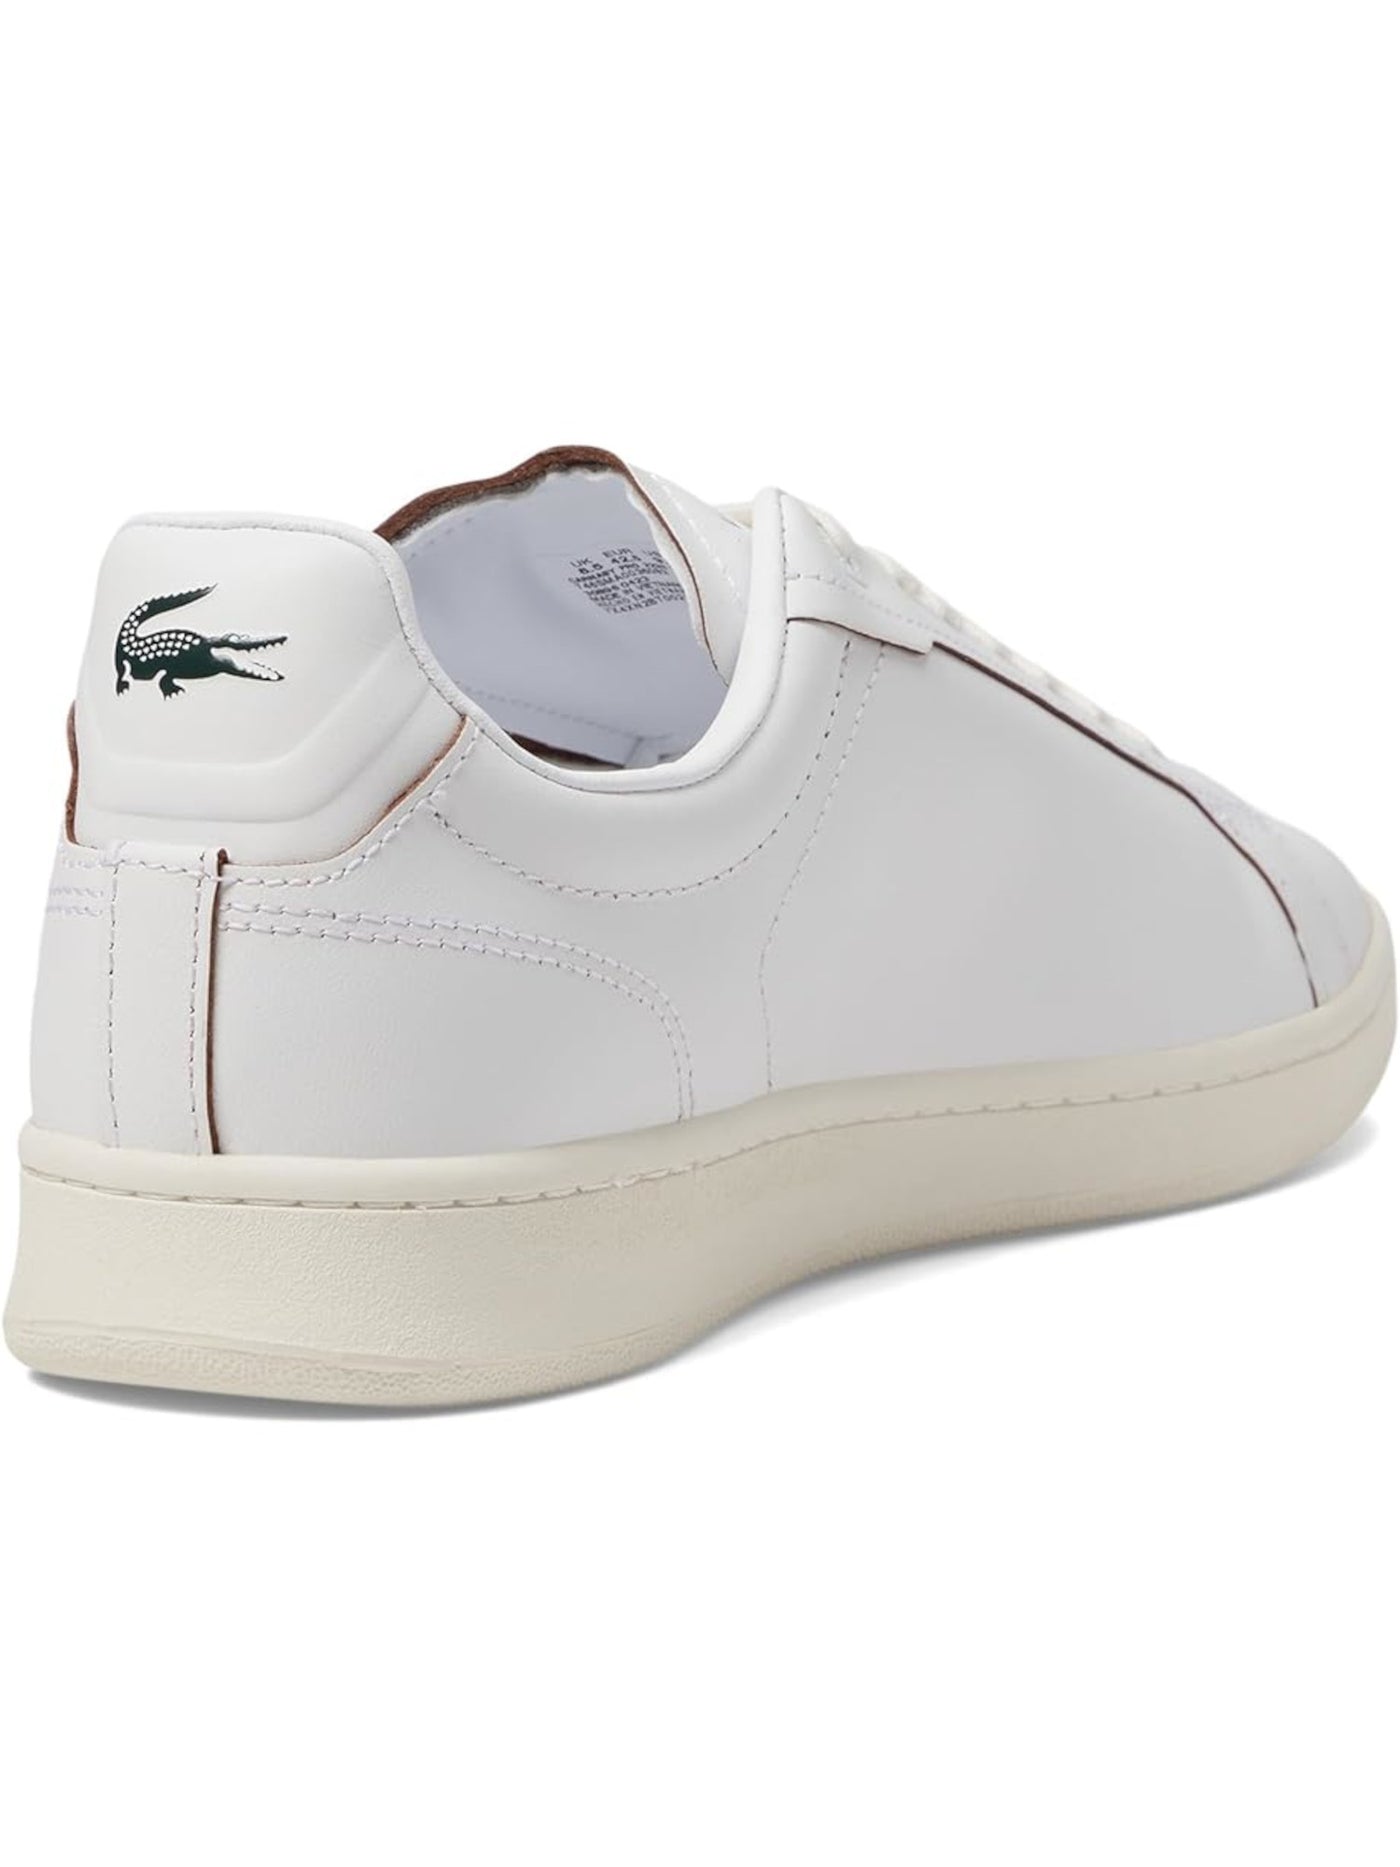 LACOSTE Mens White Cushioned Carnaby Round Toe Lace-Up Leather Athletic Sneakers Shoes 11 M